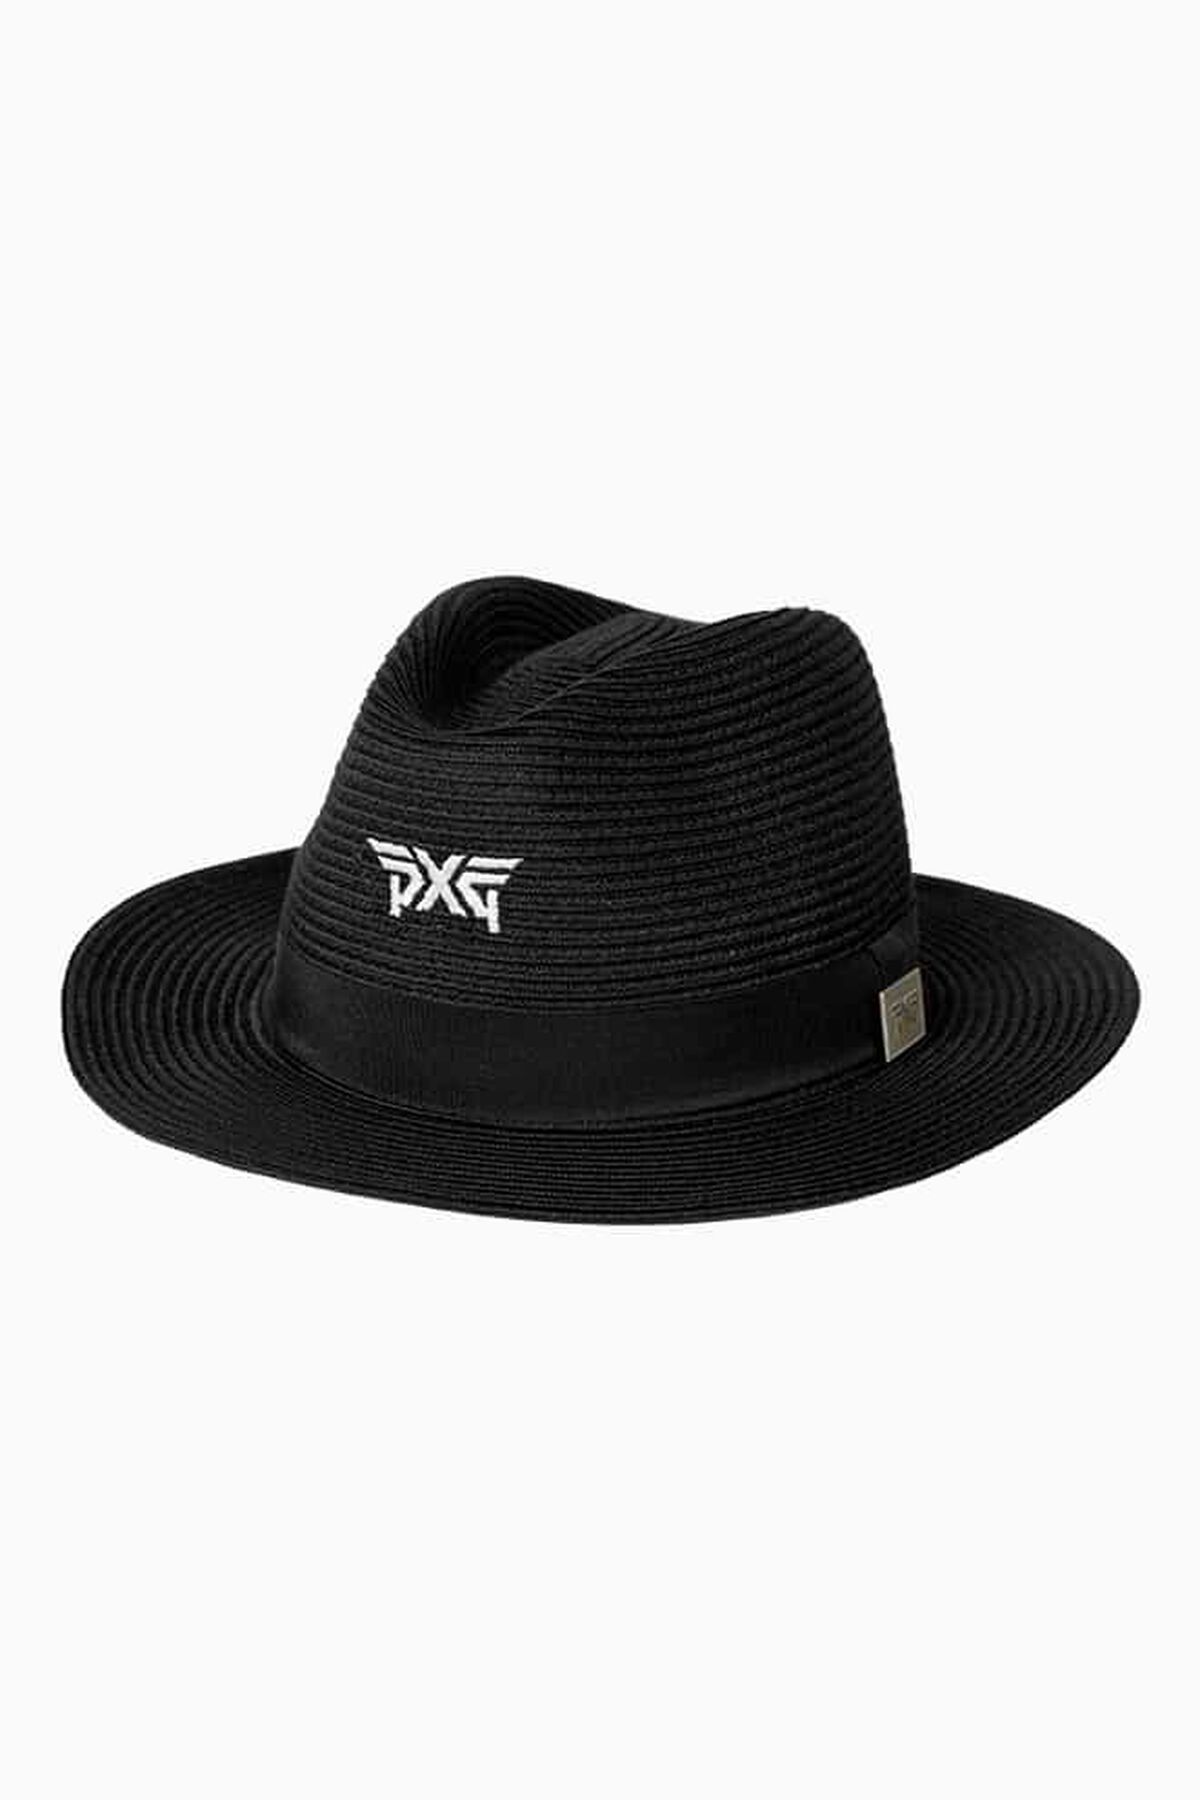 Straw Sun Hat  Shop the Highest Quality Golf Apparel, Gear, Accessories  and Golf Clubs at PXG